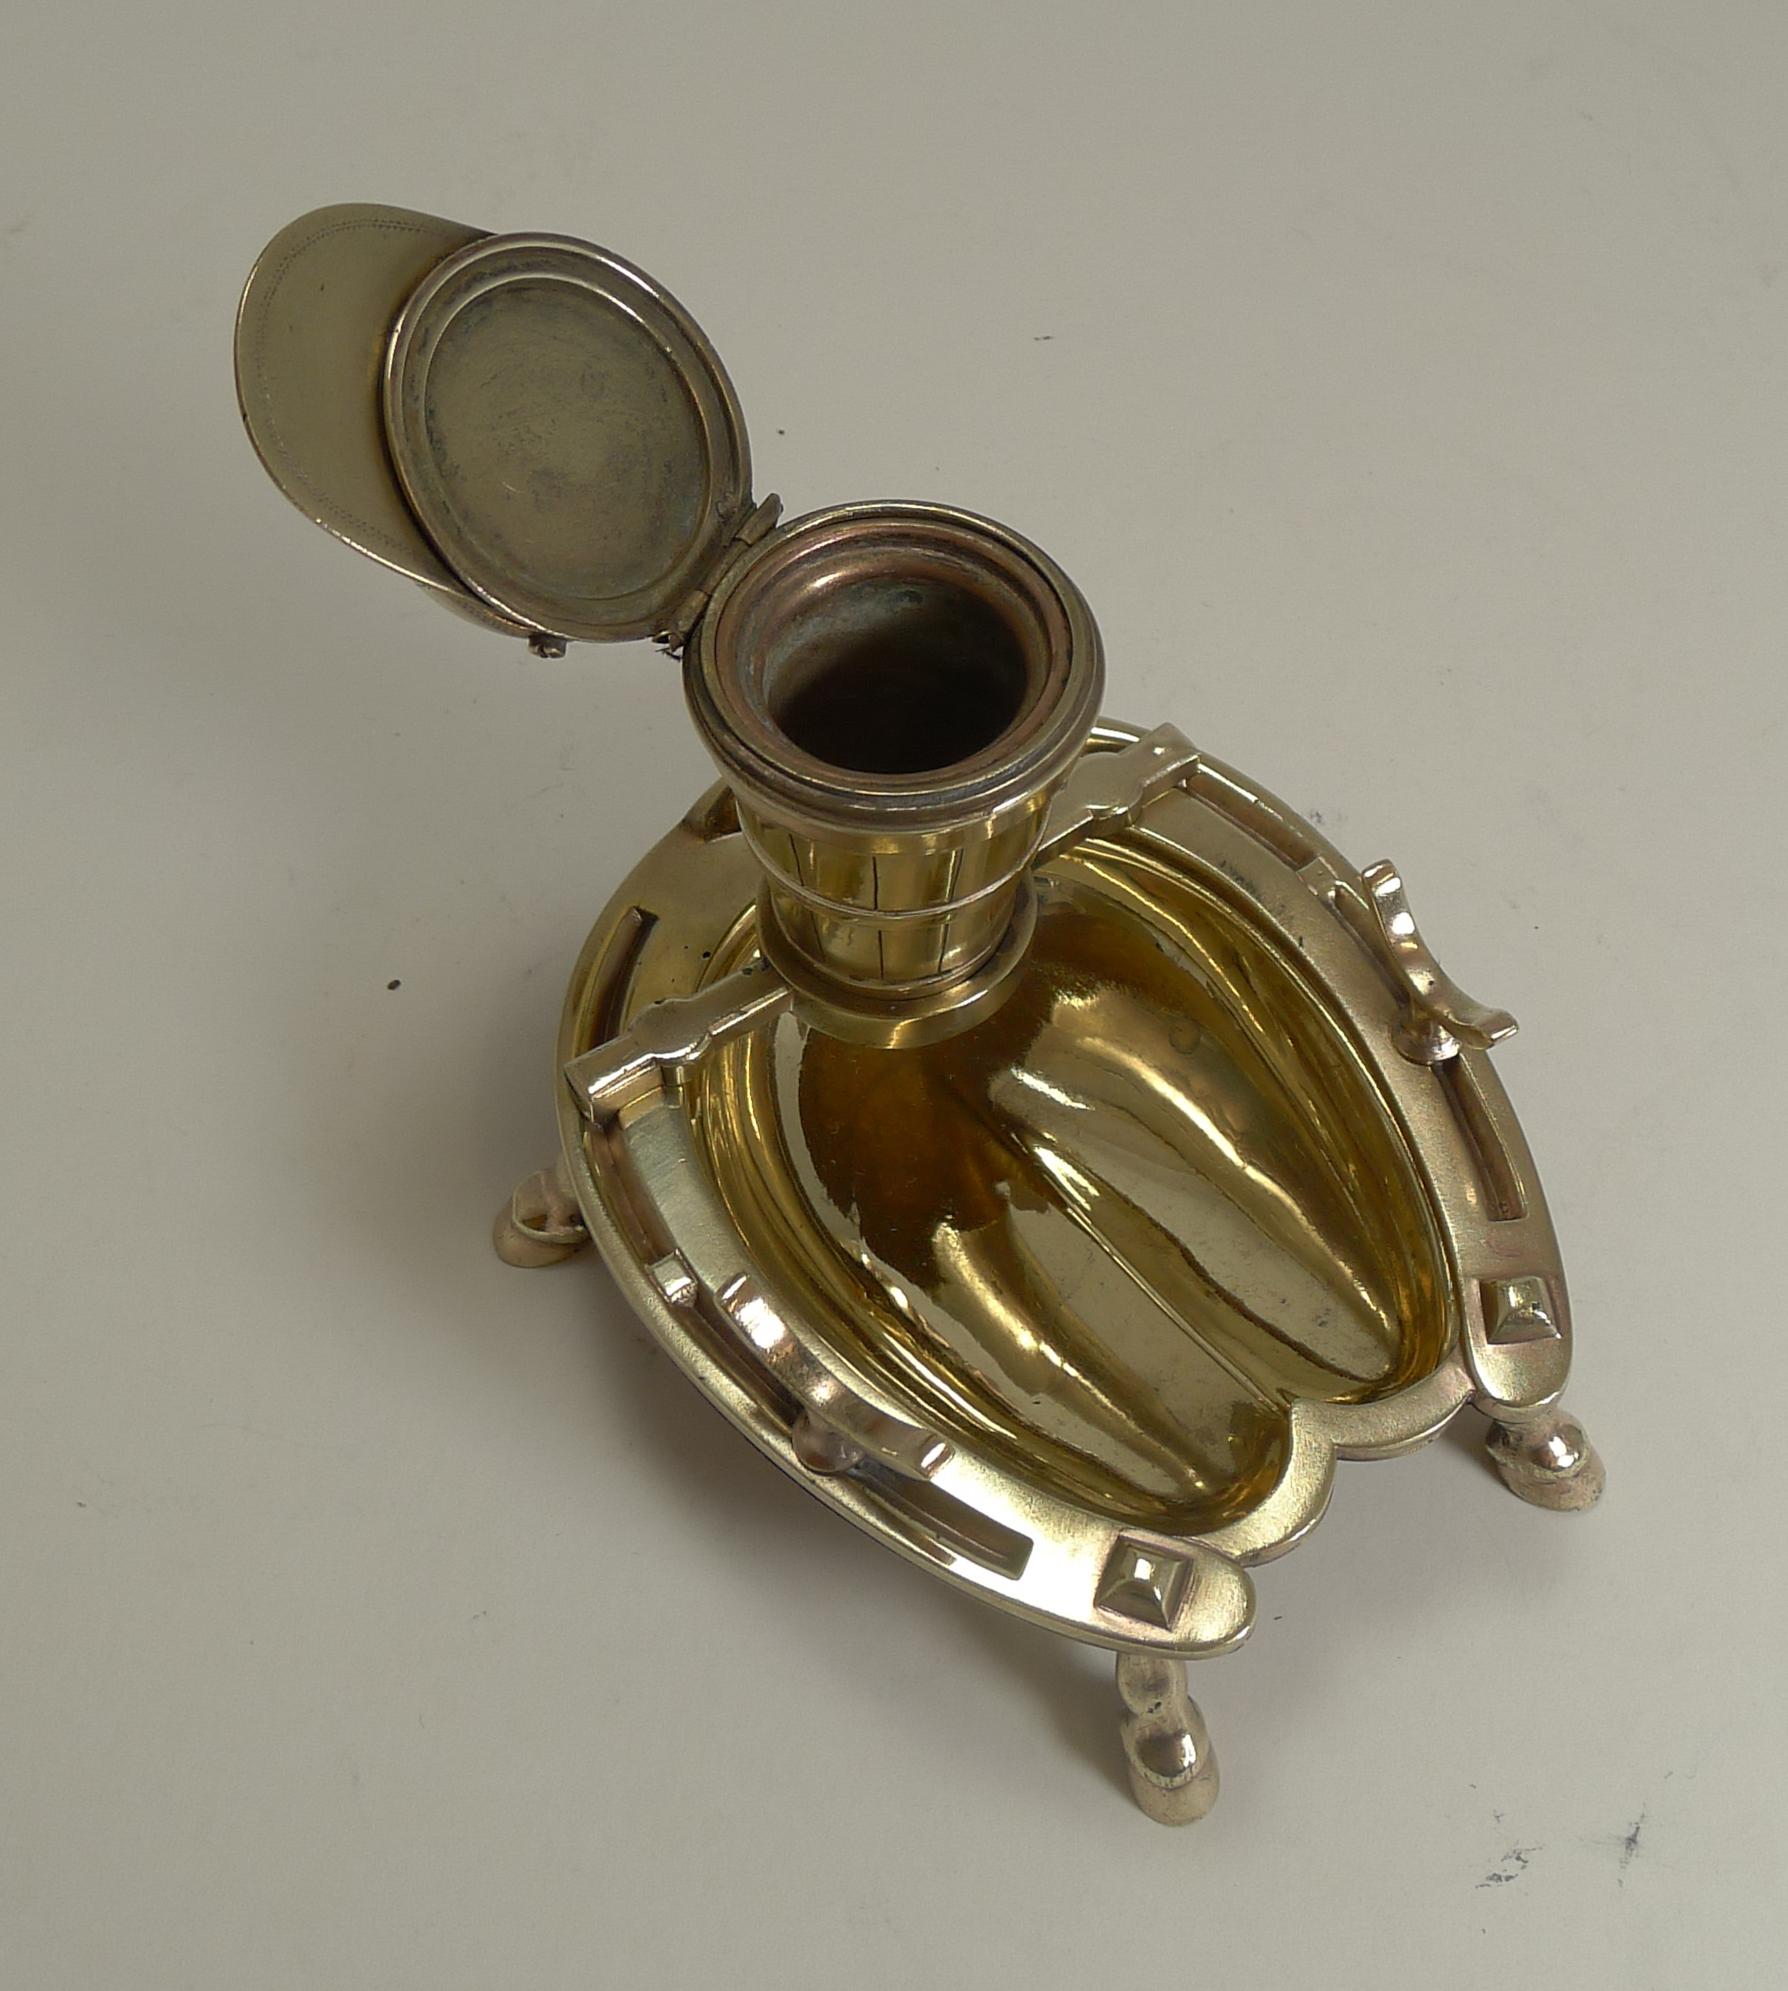 A handsome heavy cast brass inkwell with a highly collectable Equestrian theme. The horseshoe shaped base stands on four horse hoof legs, the tray having a cradle each side acting as a pen rest.

The inkwell itself is in the from of a coopered